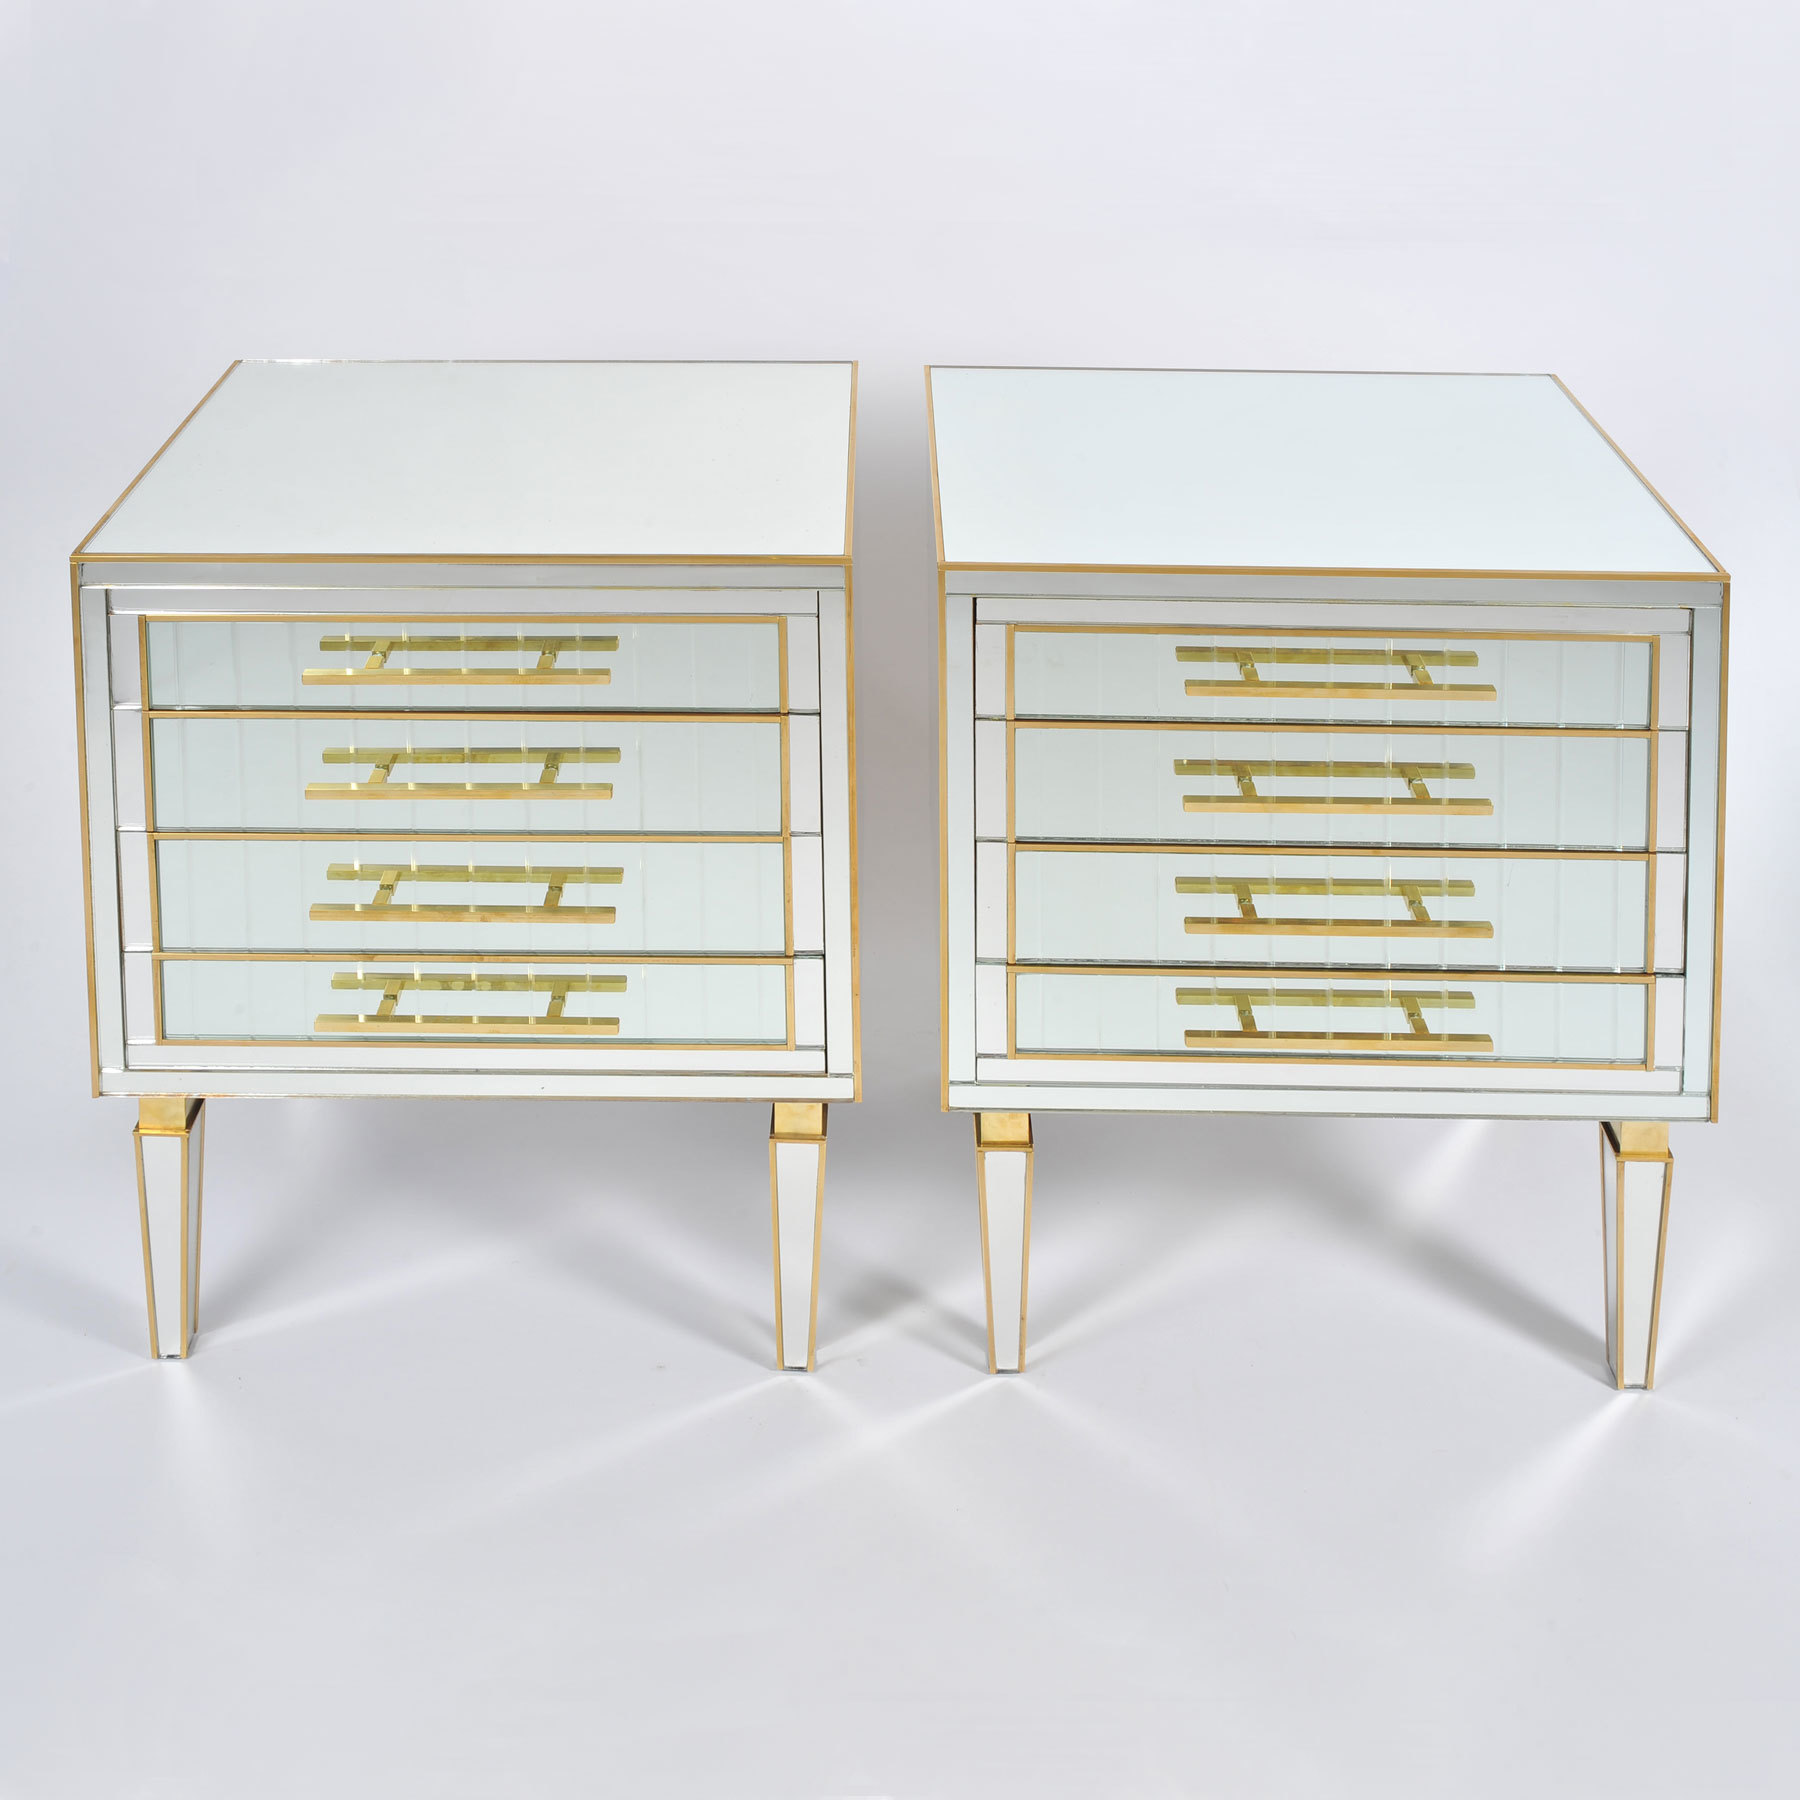 The image for Pair Of Mirrored Chests 01 Vw